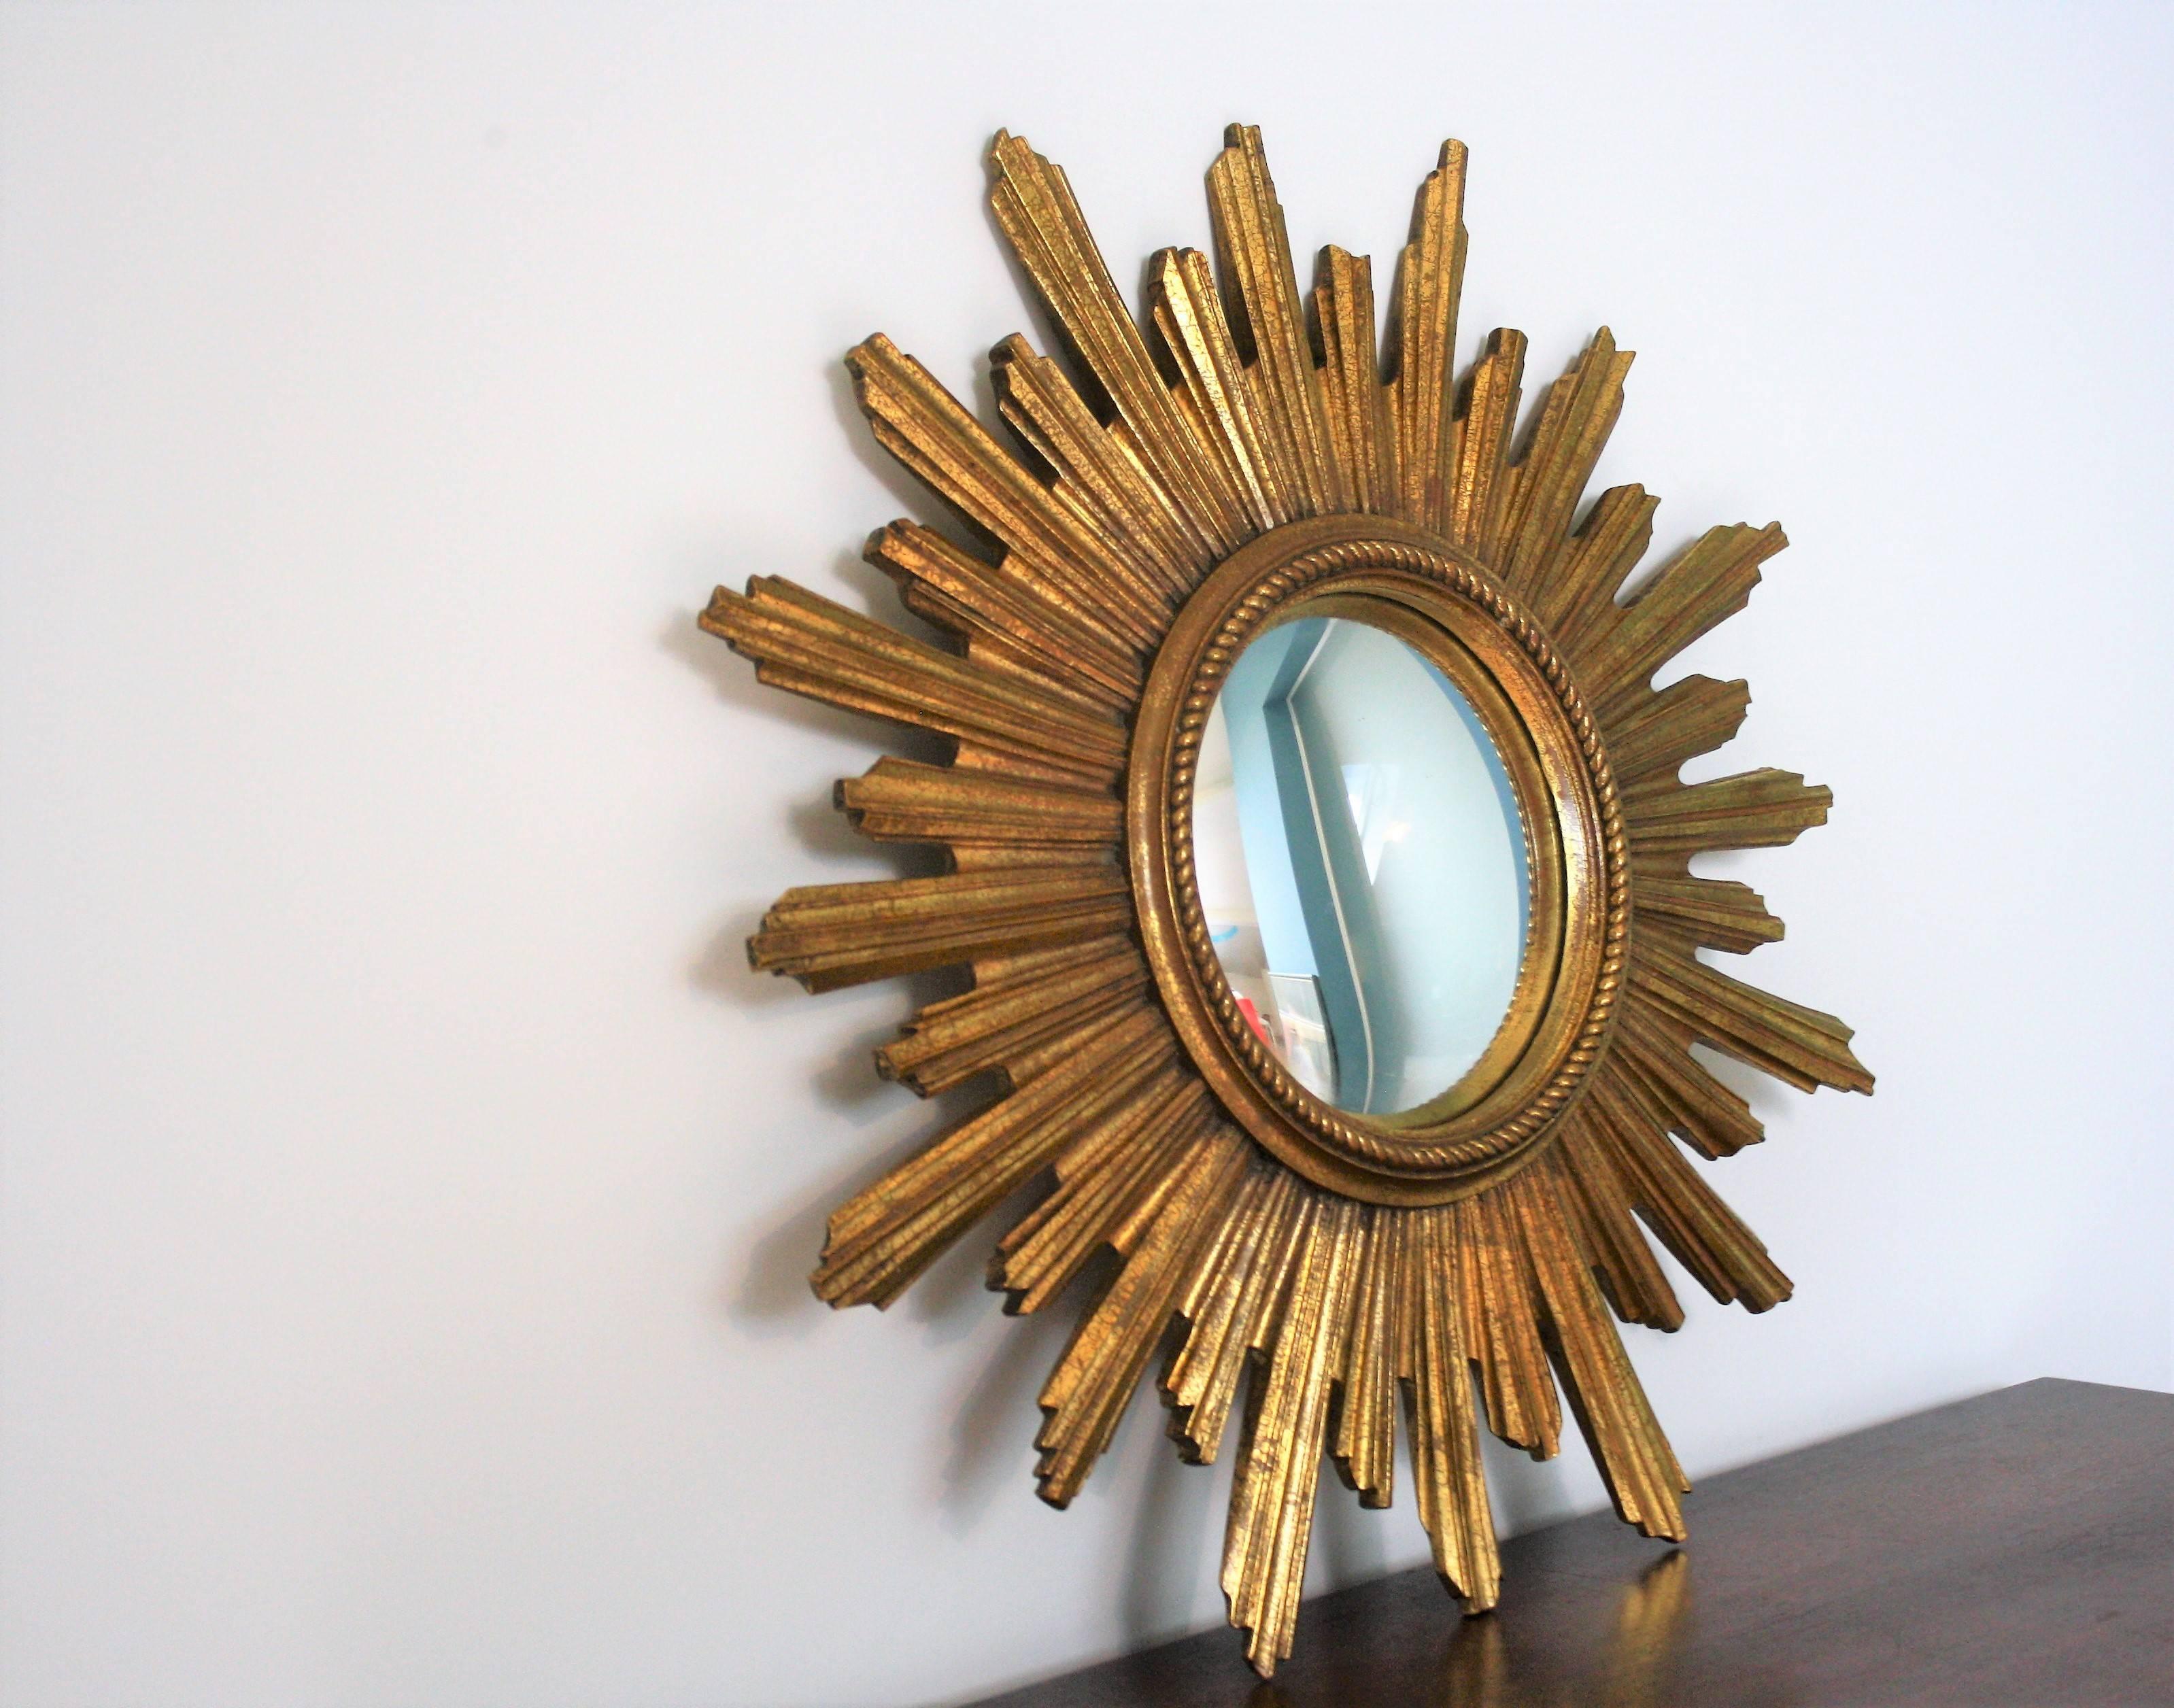 Gilded resin sunburst mirror with convex mirror glass.

The golden mirror is in a very good condition.

The mirror is made by Geratal, a Belgium company.

1960s - made in Belgium

Measures: Diameter 45cm/18"

We have two pieces